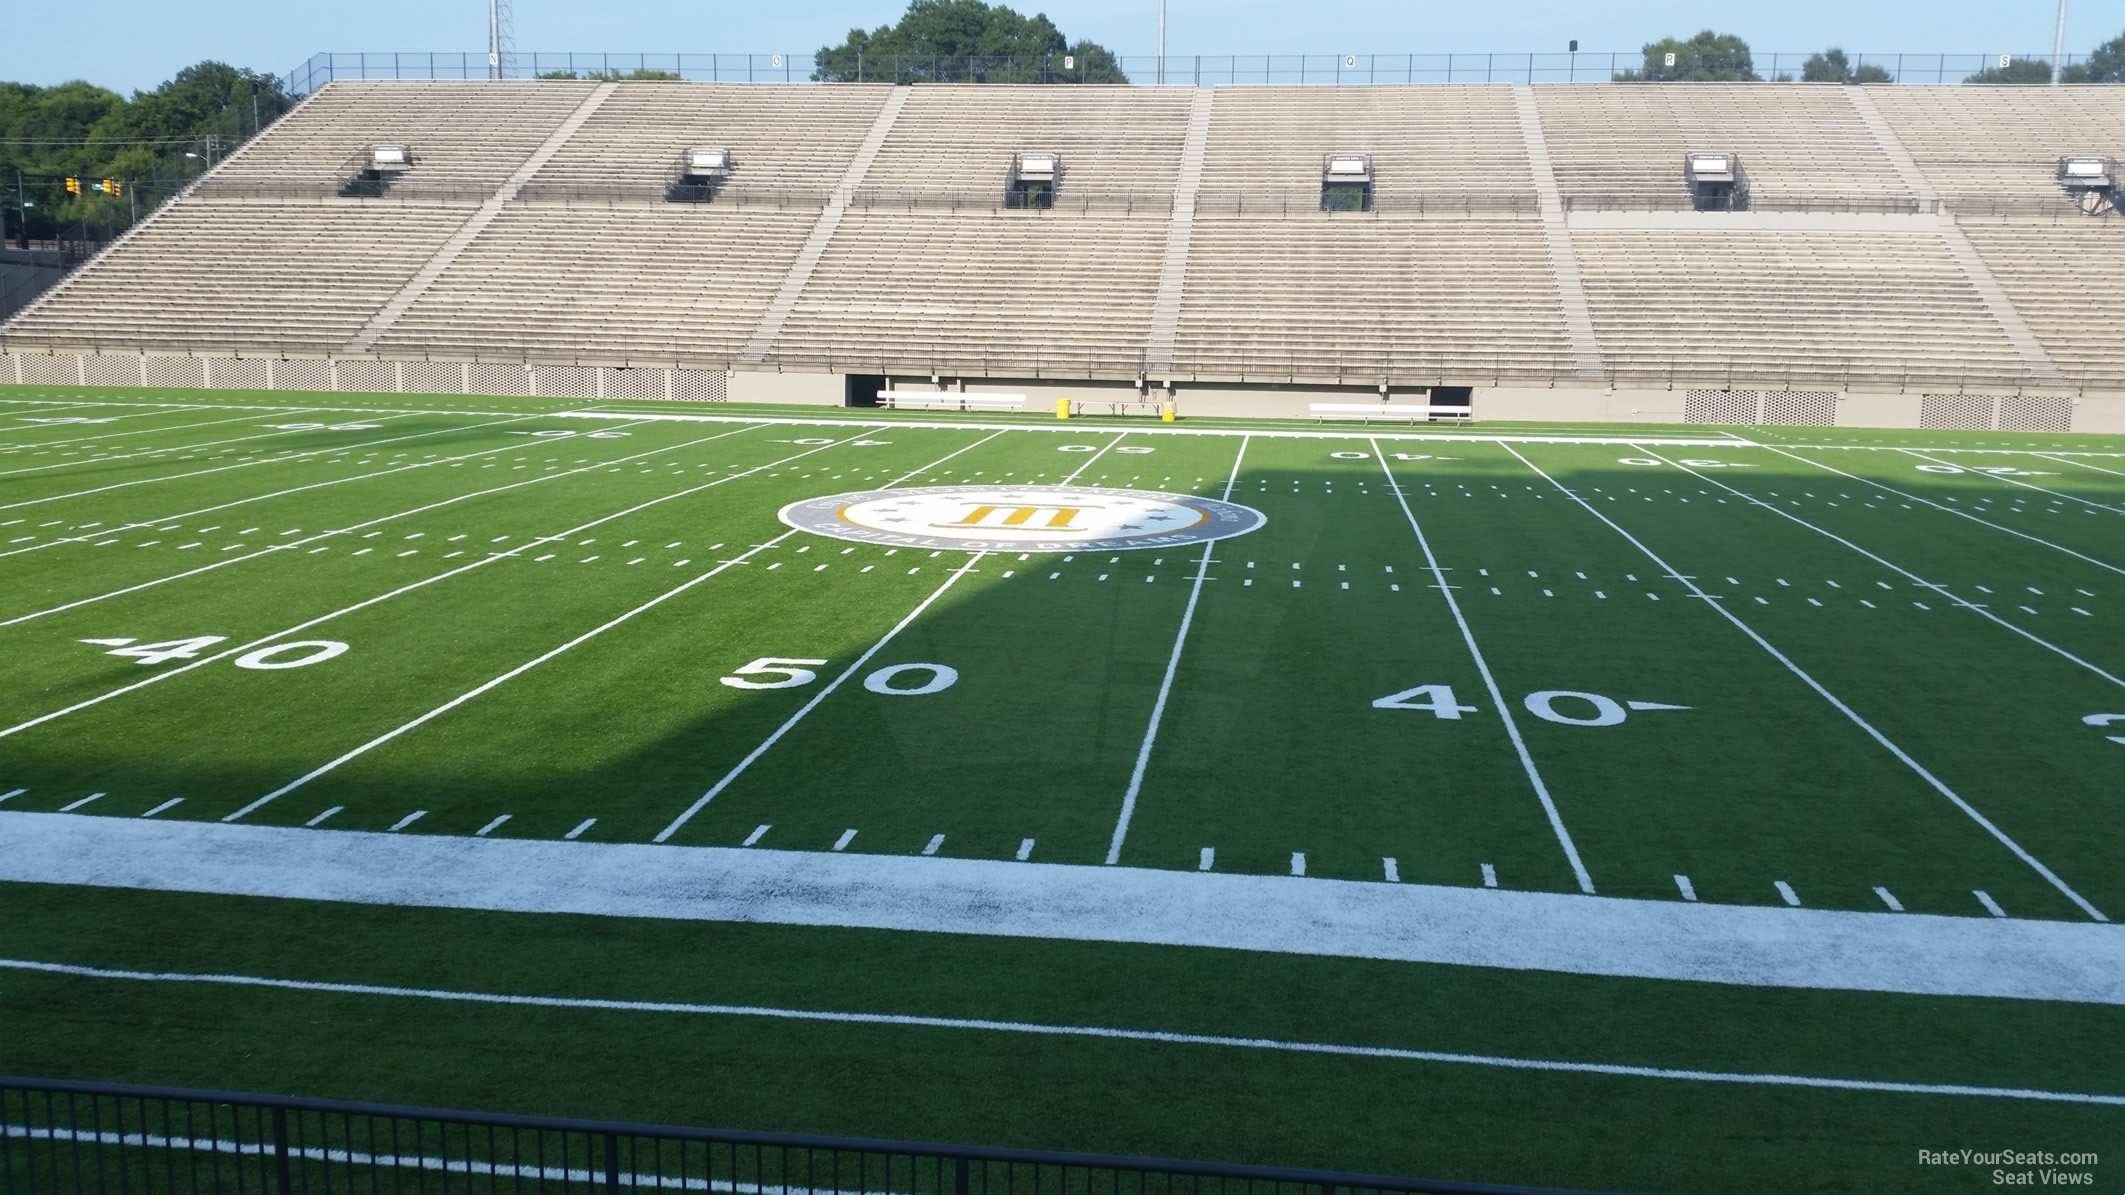 section d, row 5 seat view  - cramton bowl